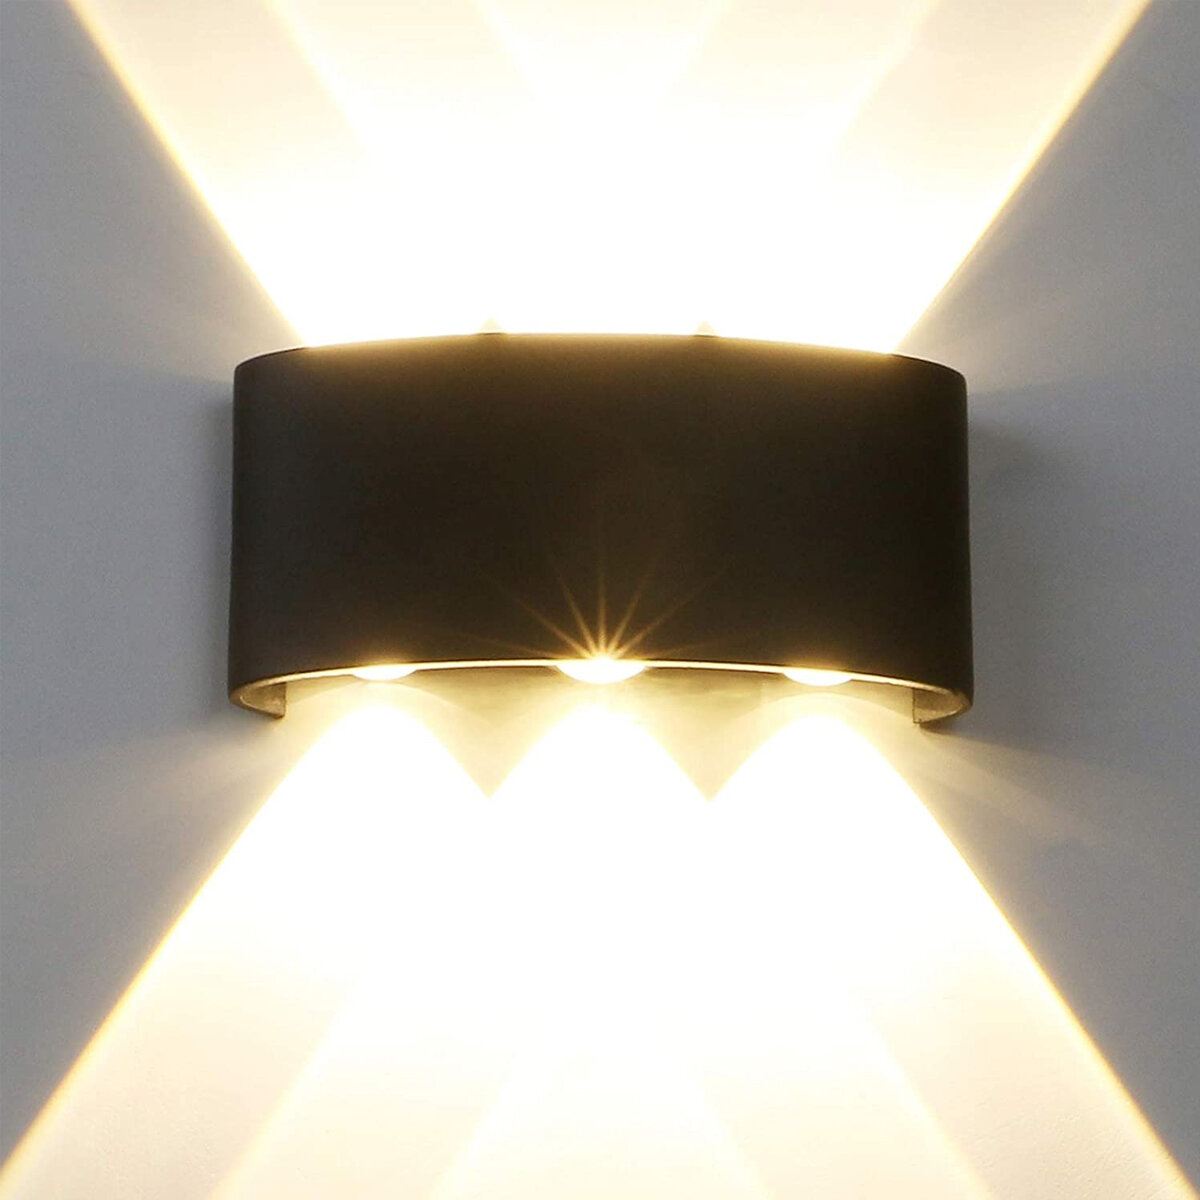 2-8W LED Wall Lights Modern Up Down Sconce Lighting Fixture Lamp Indoor Outdoor